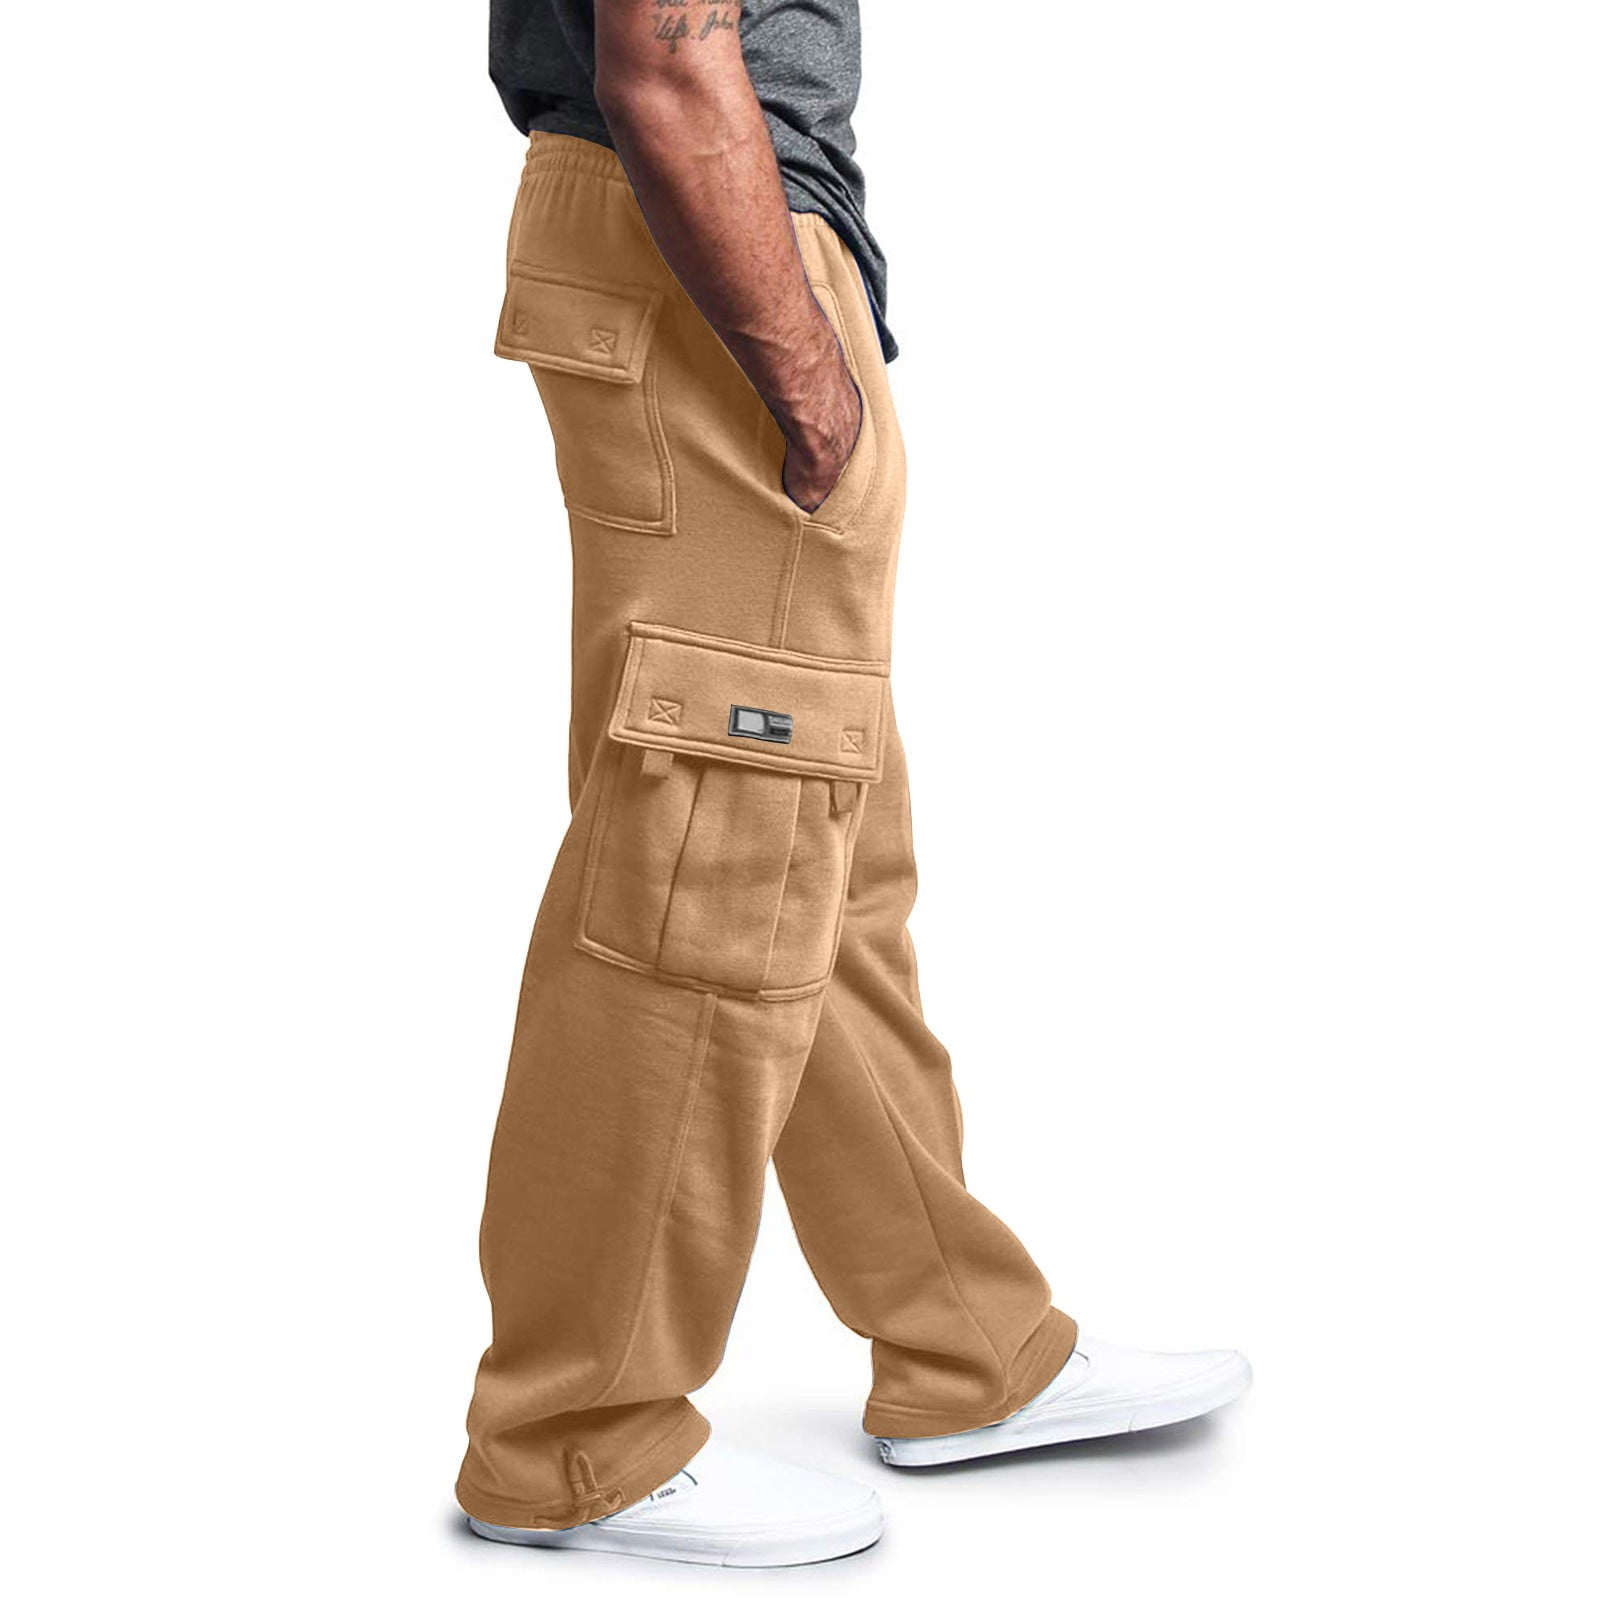 PMUYBHF Baggy Cargo Pants Men Beige Men's Rope Loosening Waist Solid Color  Pocket Trousers Loose Sports Trousers Cargo Jeans for Men Stretch Fit